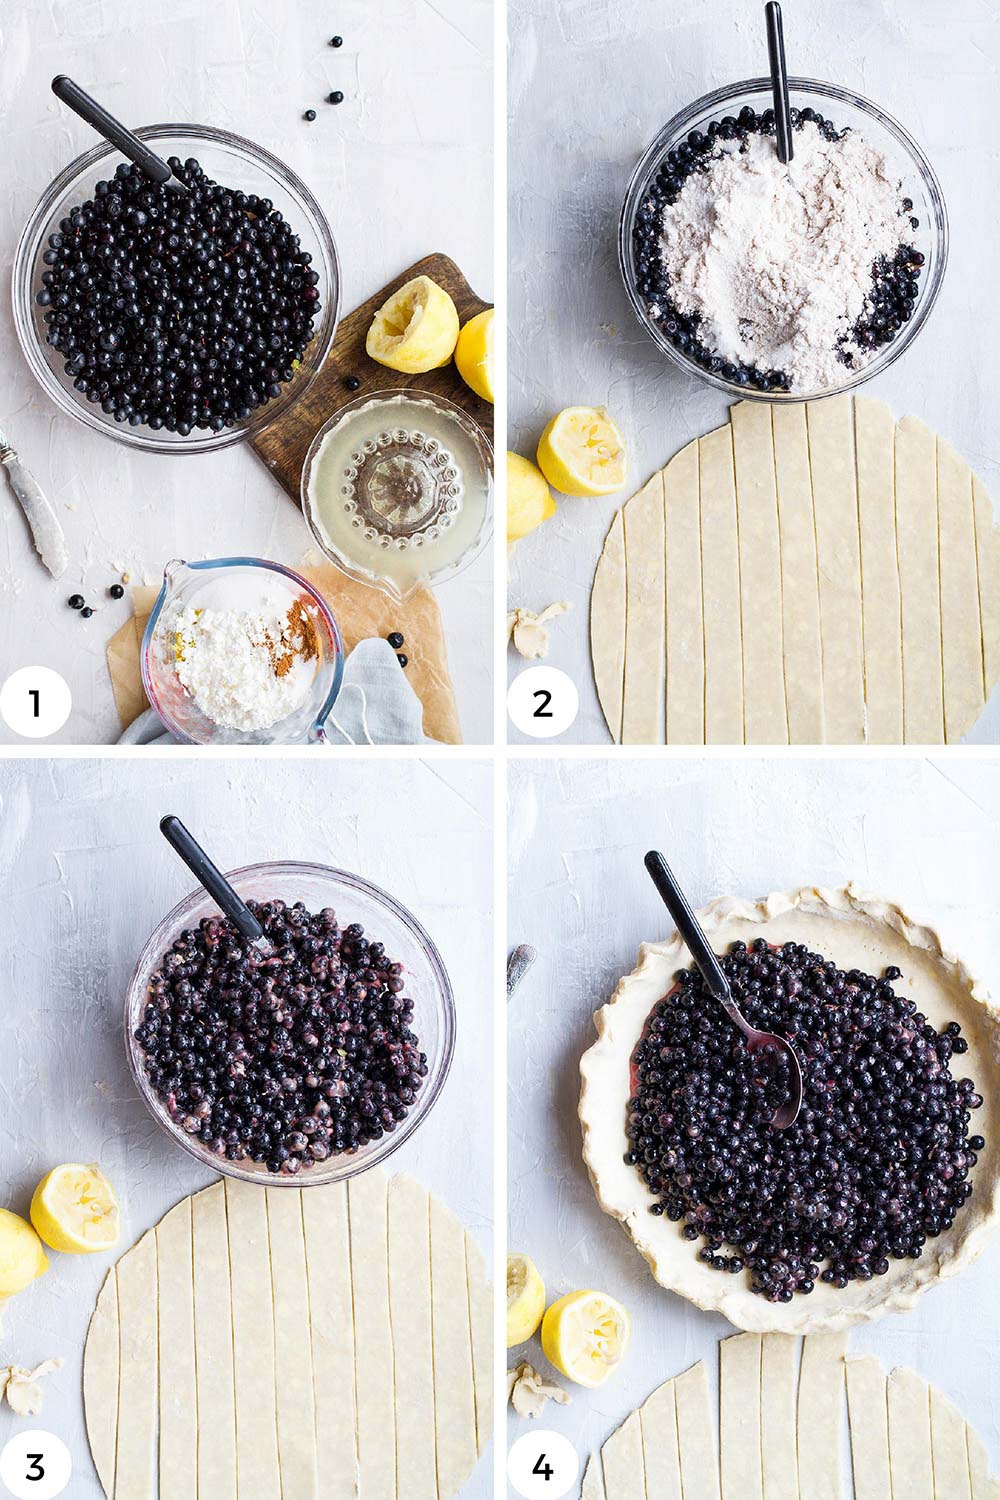 Steps to make uncooked blueberry filling.